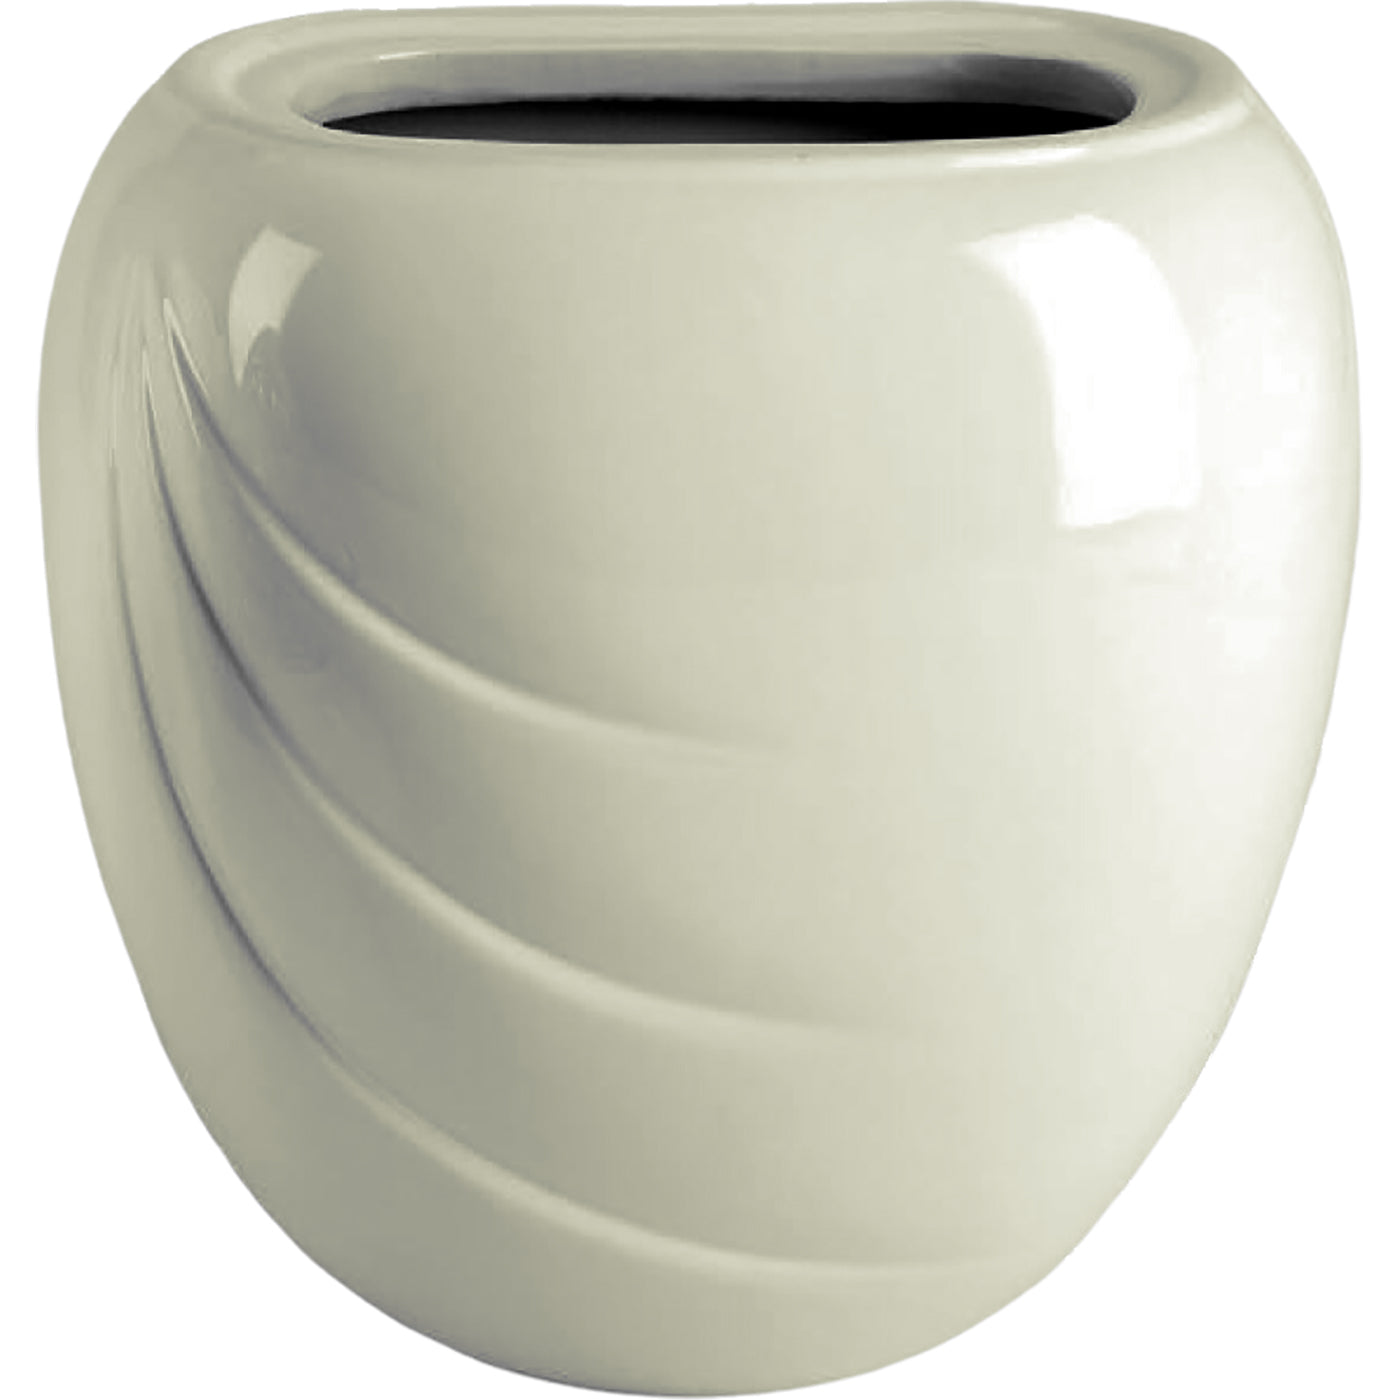 Rectangular grave vase Ecotre ivory 19x17cm - 7.5x6.7in In ivory porcelain, wall attached ECO148P/A